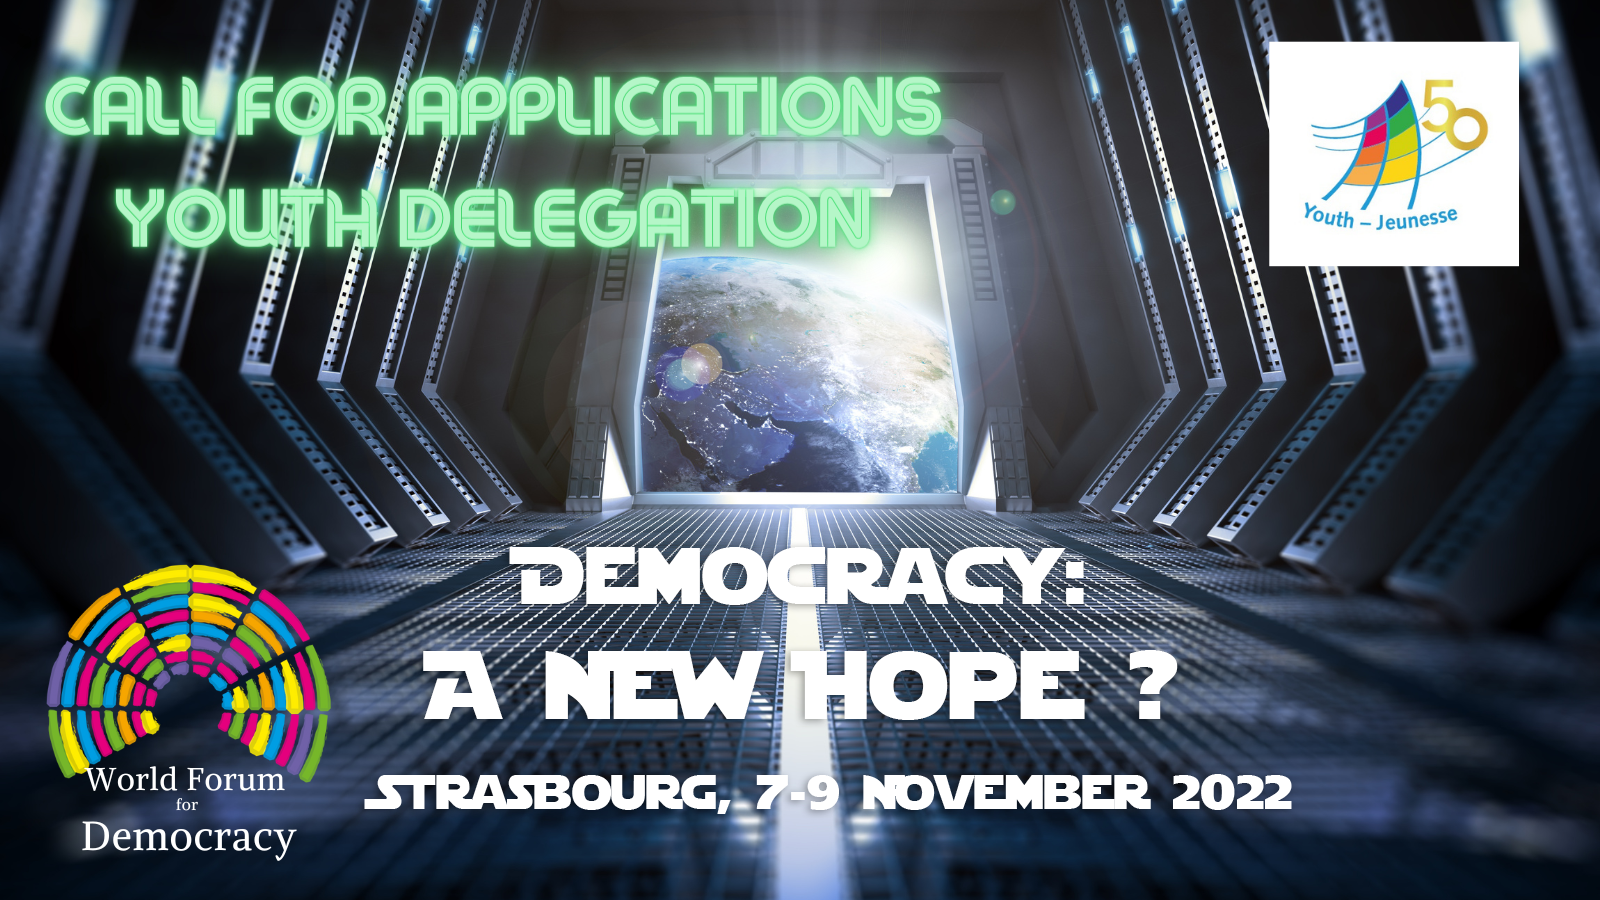 Call for applications: World Forum for Democracy 2022 – Youth Delegation